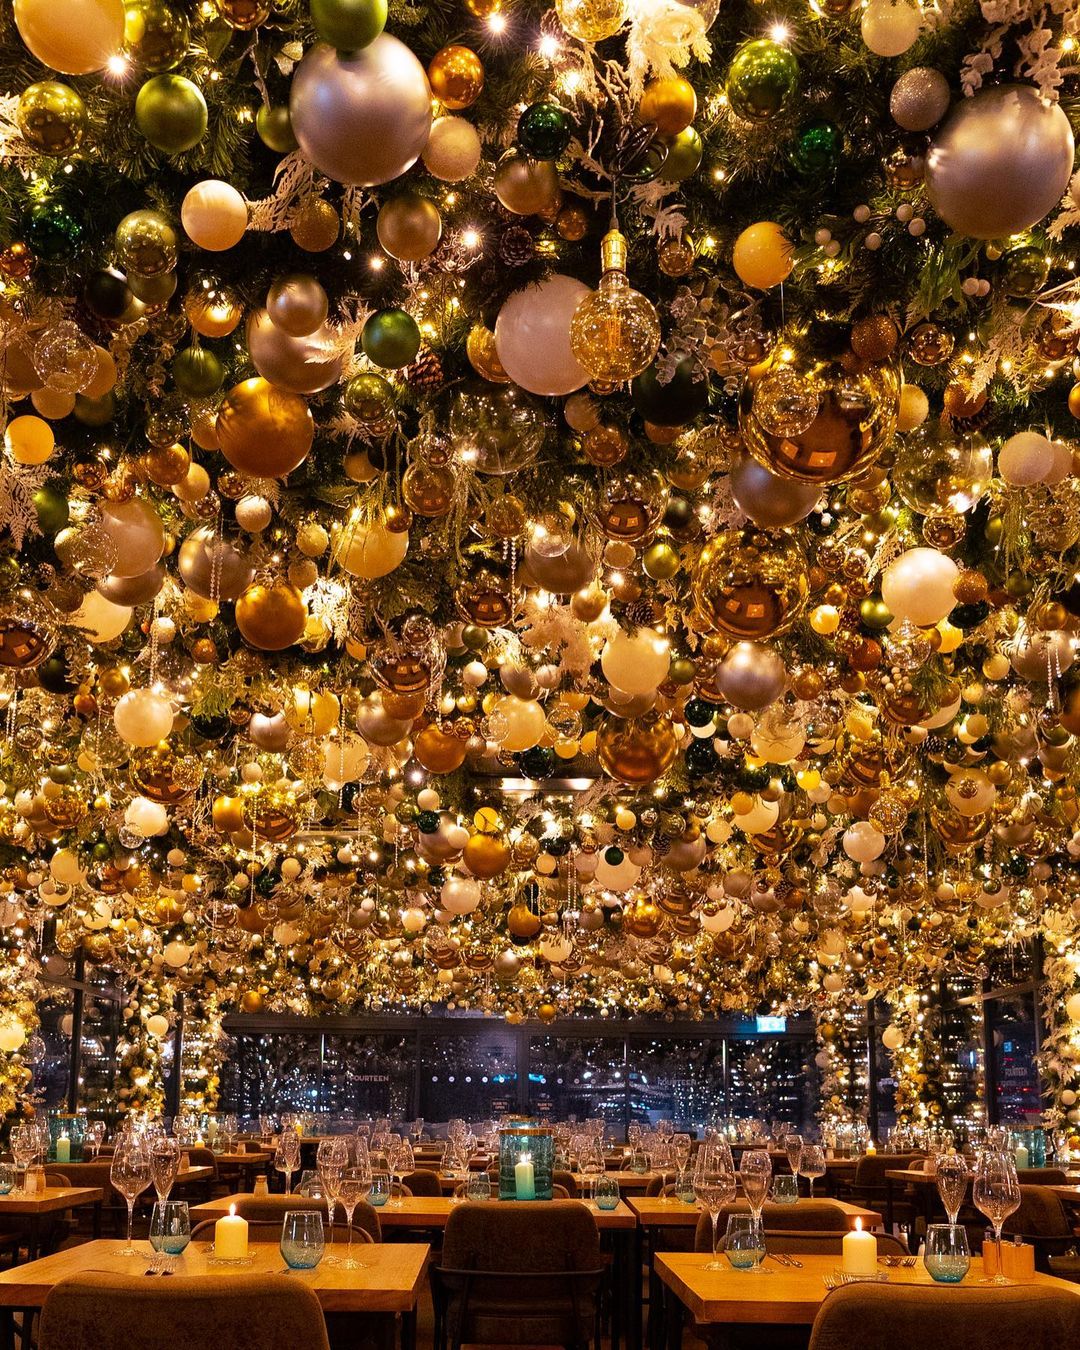 A restaurant with 50,000 illuminates baubles on the ceiling at 14 Bar & Grill.